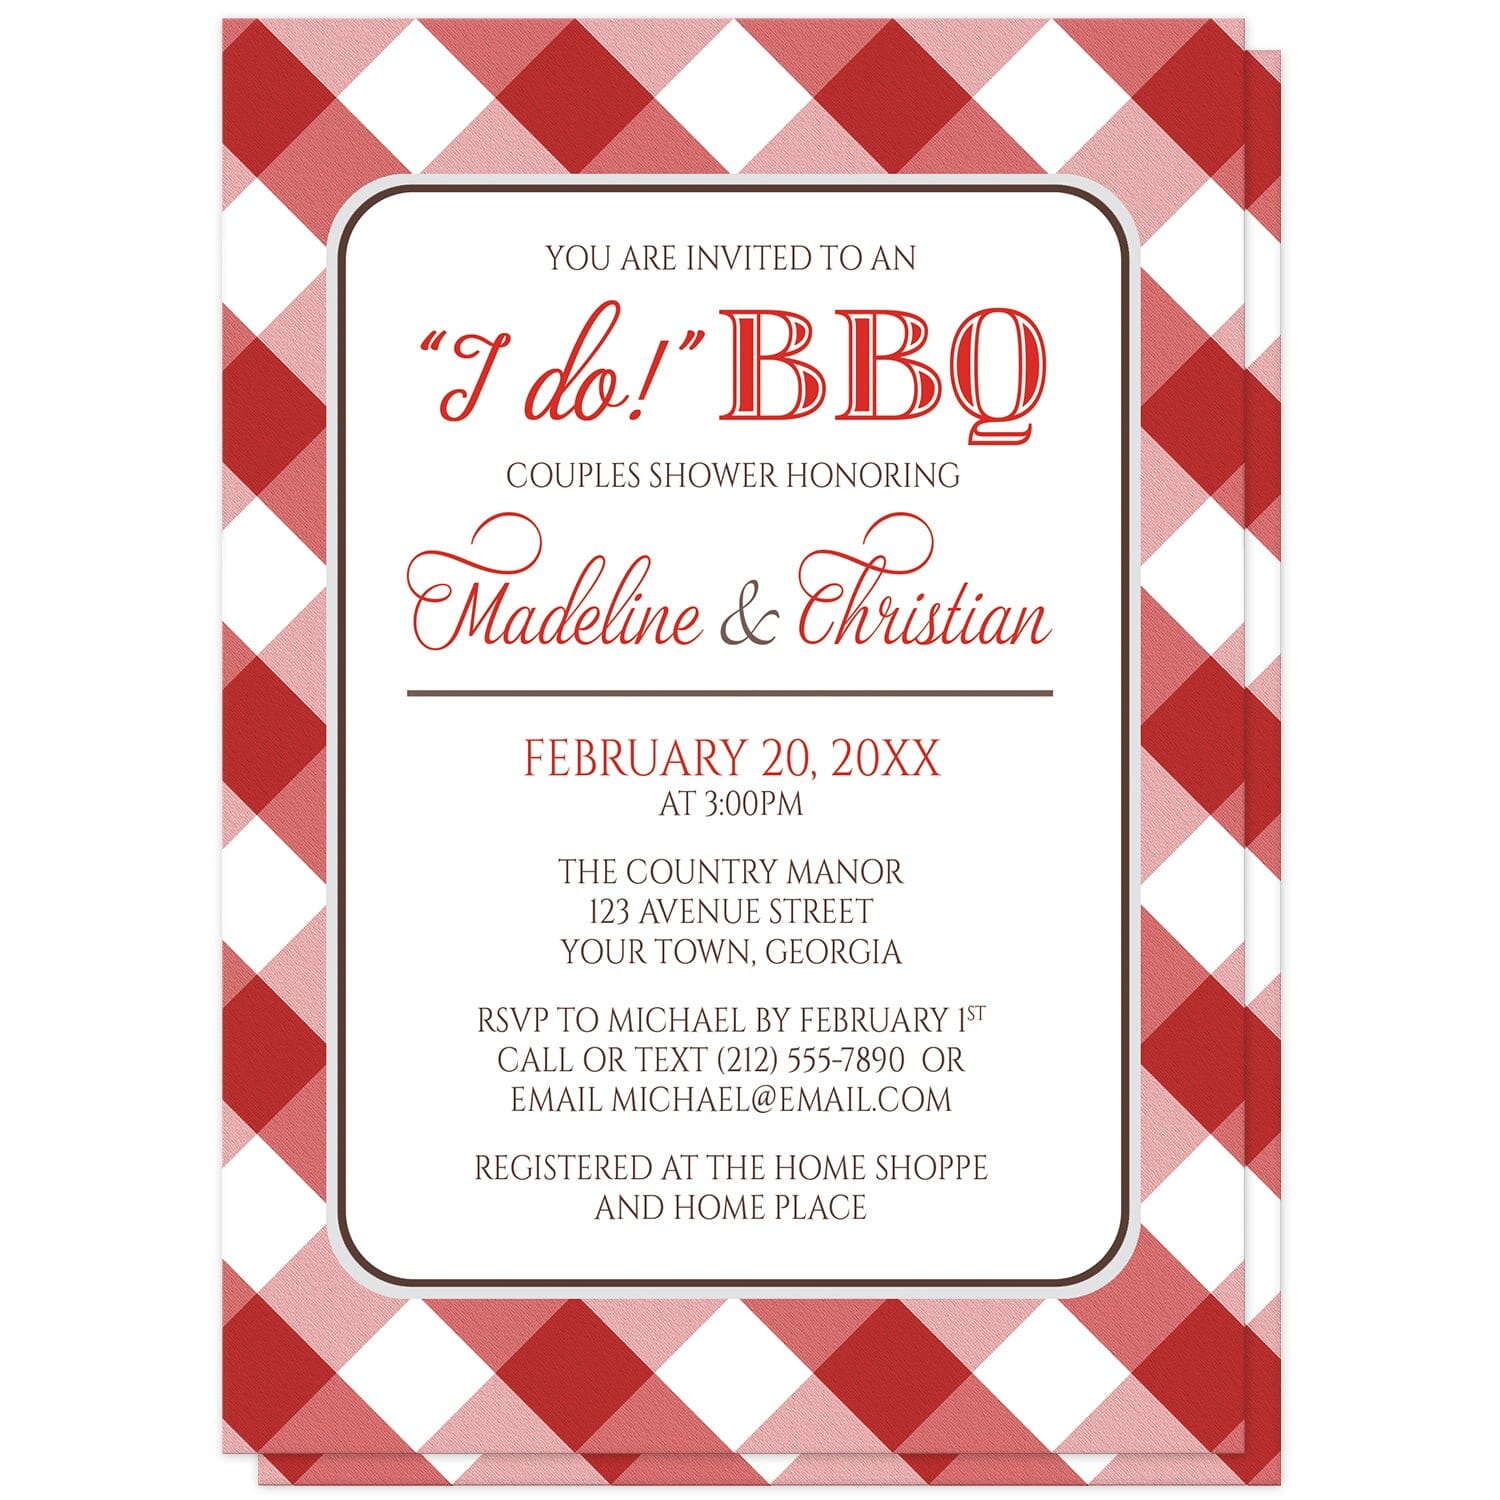 Red Gingham I Do BBQ Couples Shower Invitations at Artistically Invited. Red gingham I Do BBQ couples shower invitations with your celebration details in red and brown, in a white rounded corners frame, over a diagonal red and white gingham pattern background. The red and white gingham pattern, which is also printed on the back side, gives these I Do BBQ couples shower invitations a rustic or southern feel, while the text is printed in modern fonts.